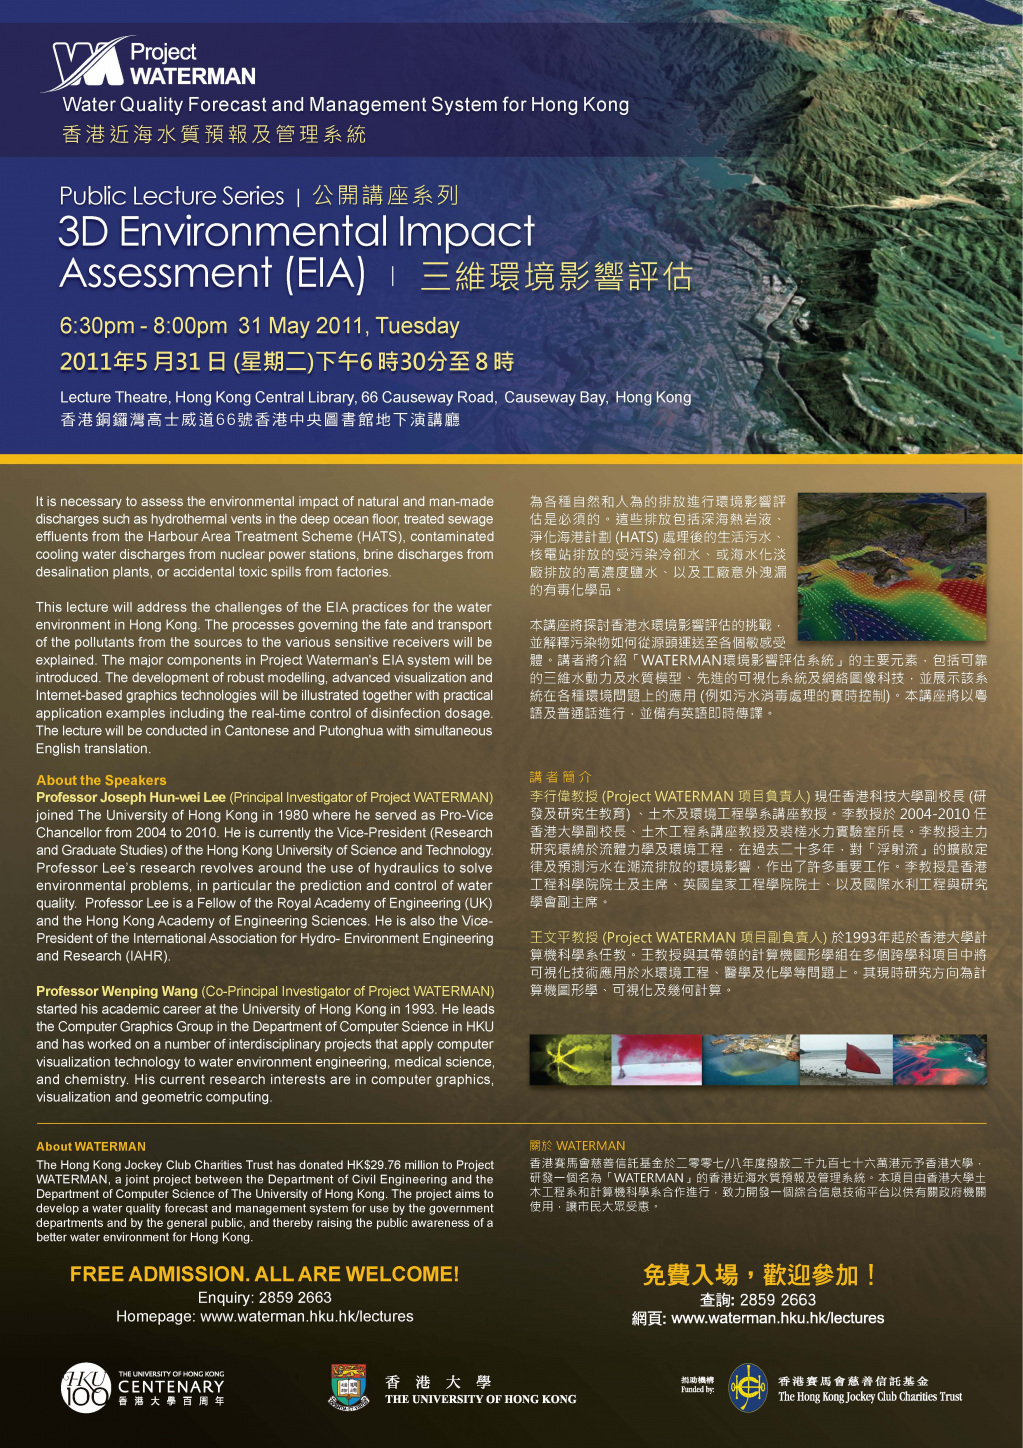 Project WATERMAN Public Lecture on 3D Environmental Impact Assessment (EIA)